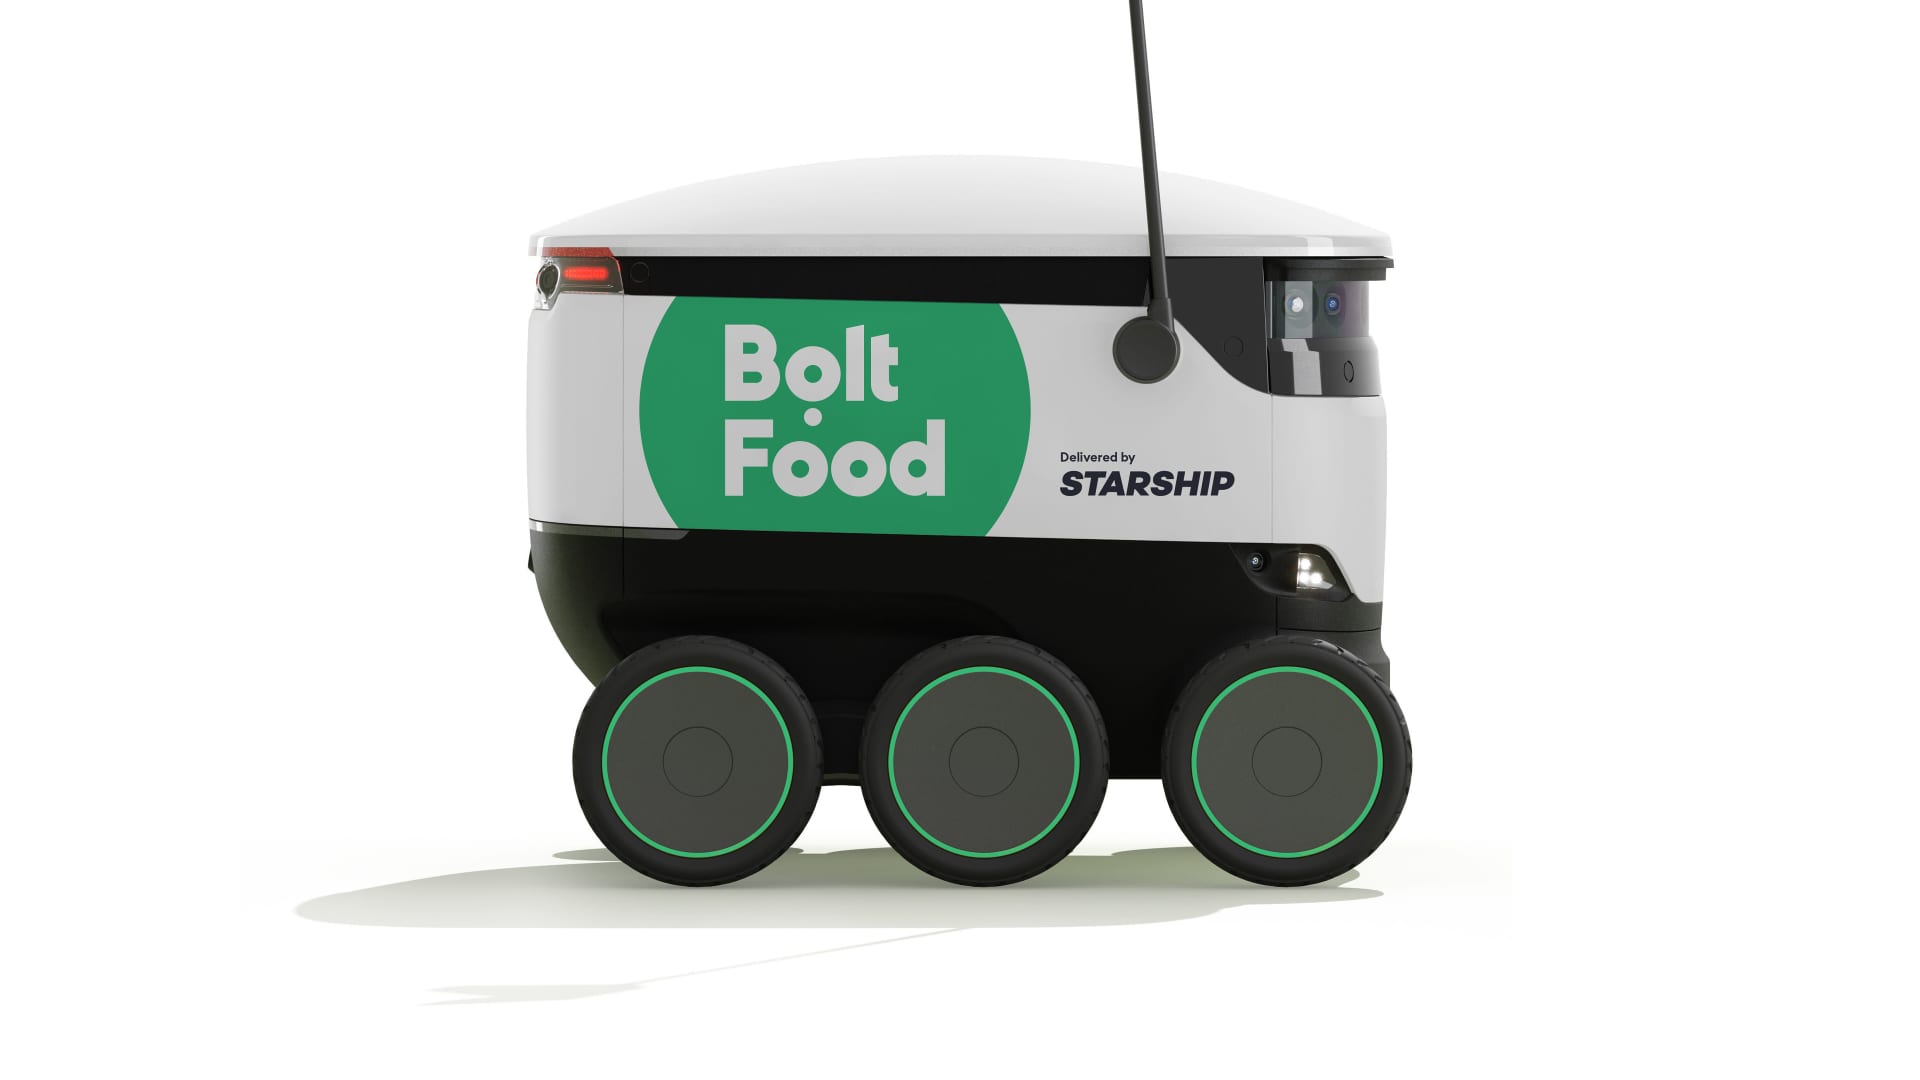 Uber rival Bolt will deliver food to your door via self-driving robots